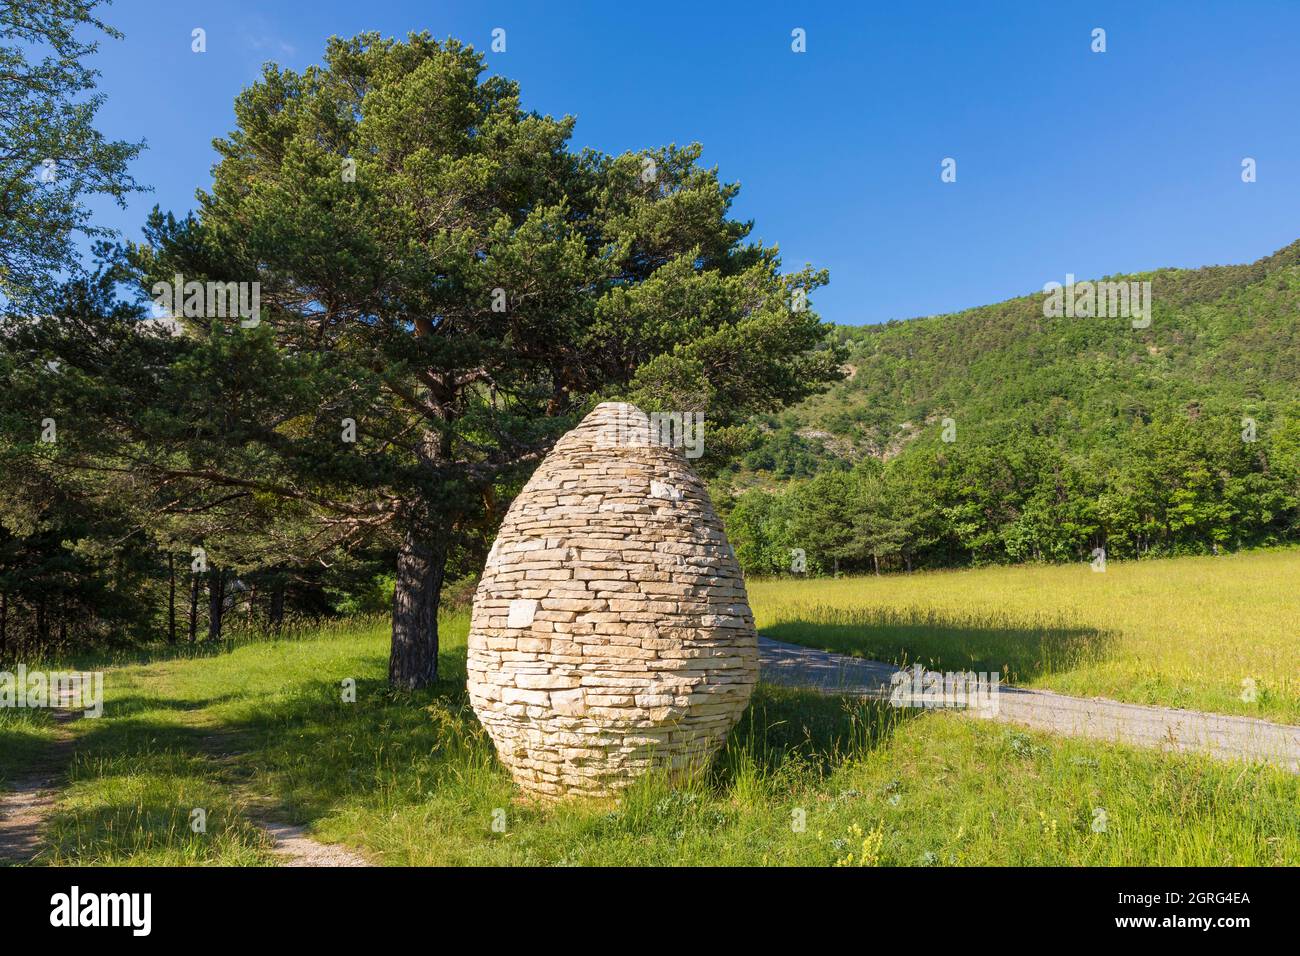 France, Alpes-de-Haute-Provence, Geological Nature Reserve of Haute Provence, Asse valley, Tartonne, Sentinelle, dry stone cairn, artwork by land art artist Andy Goldsworthy Stock Photo